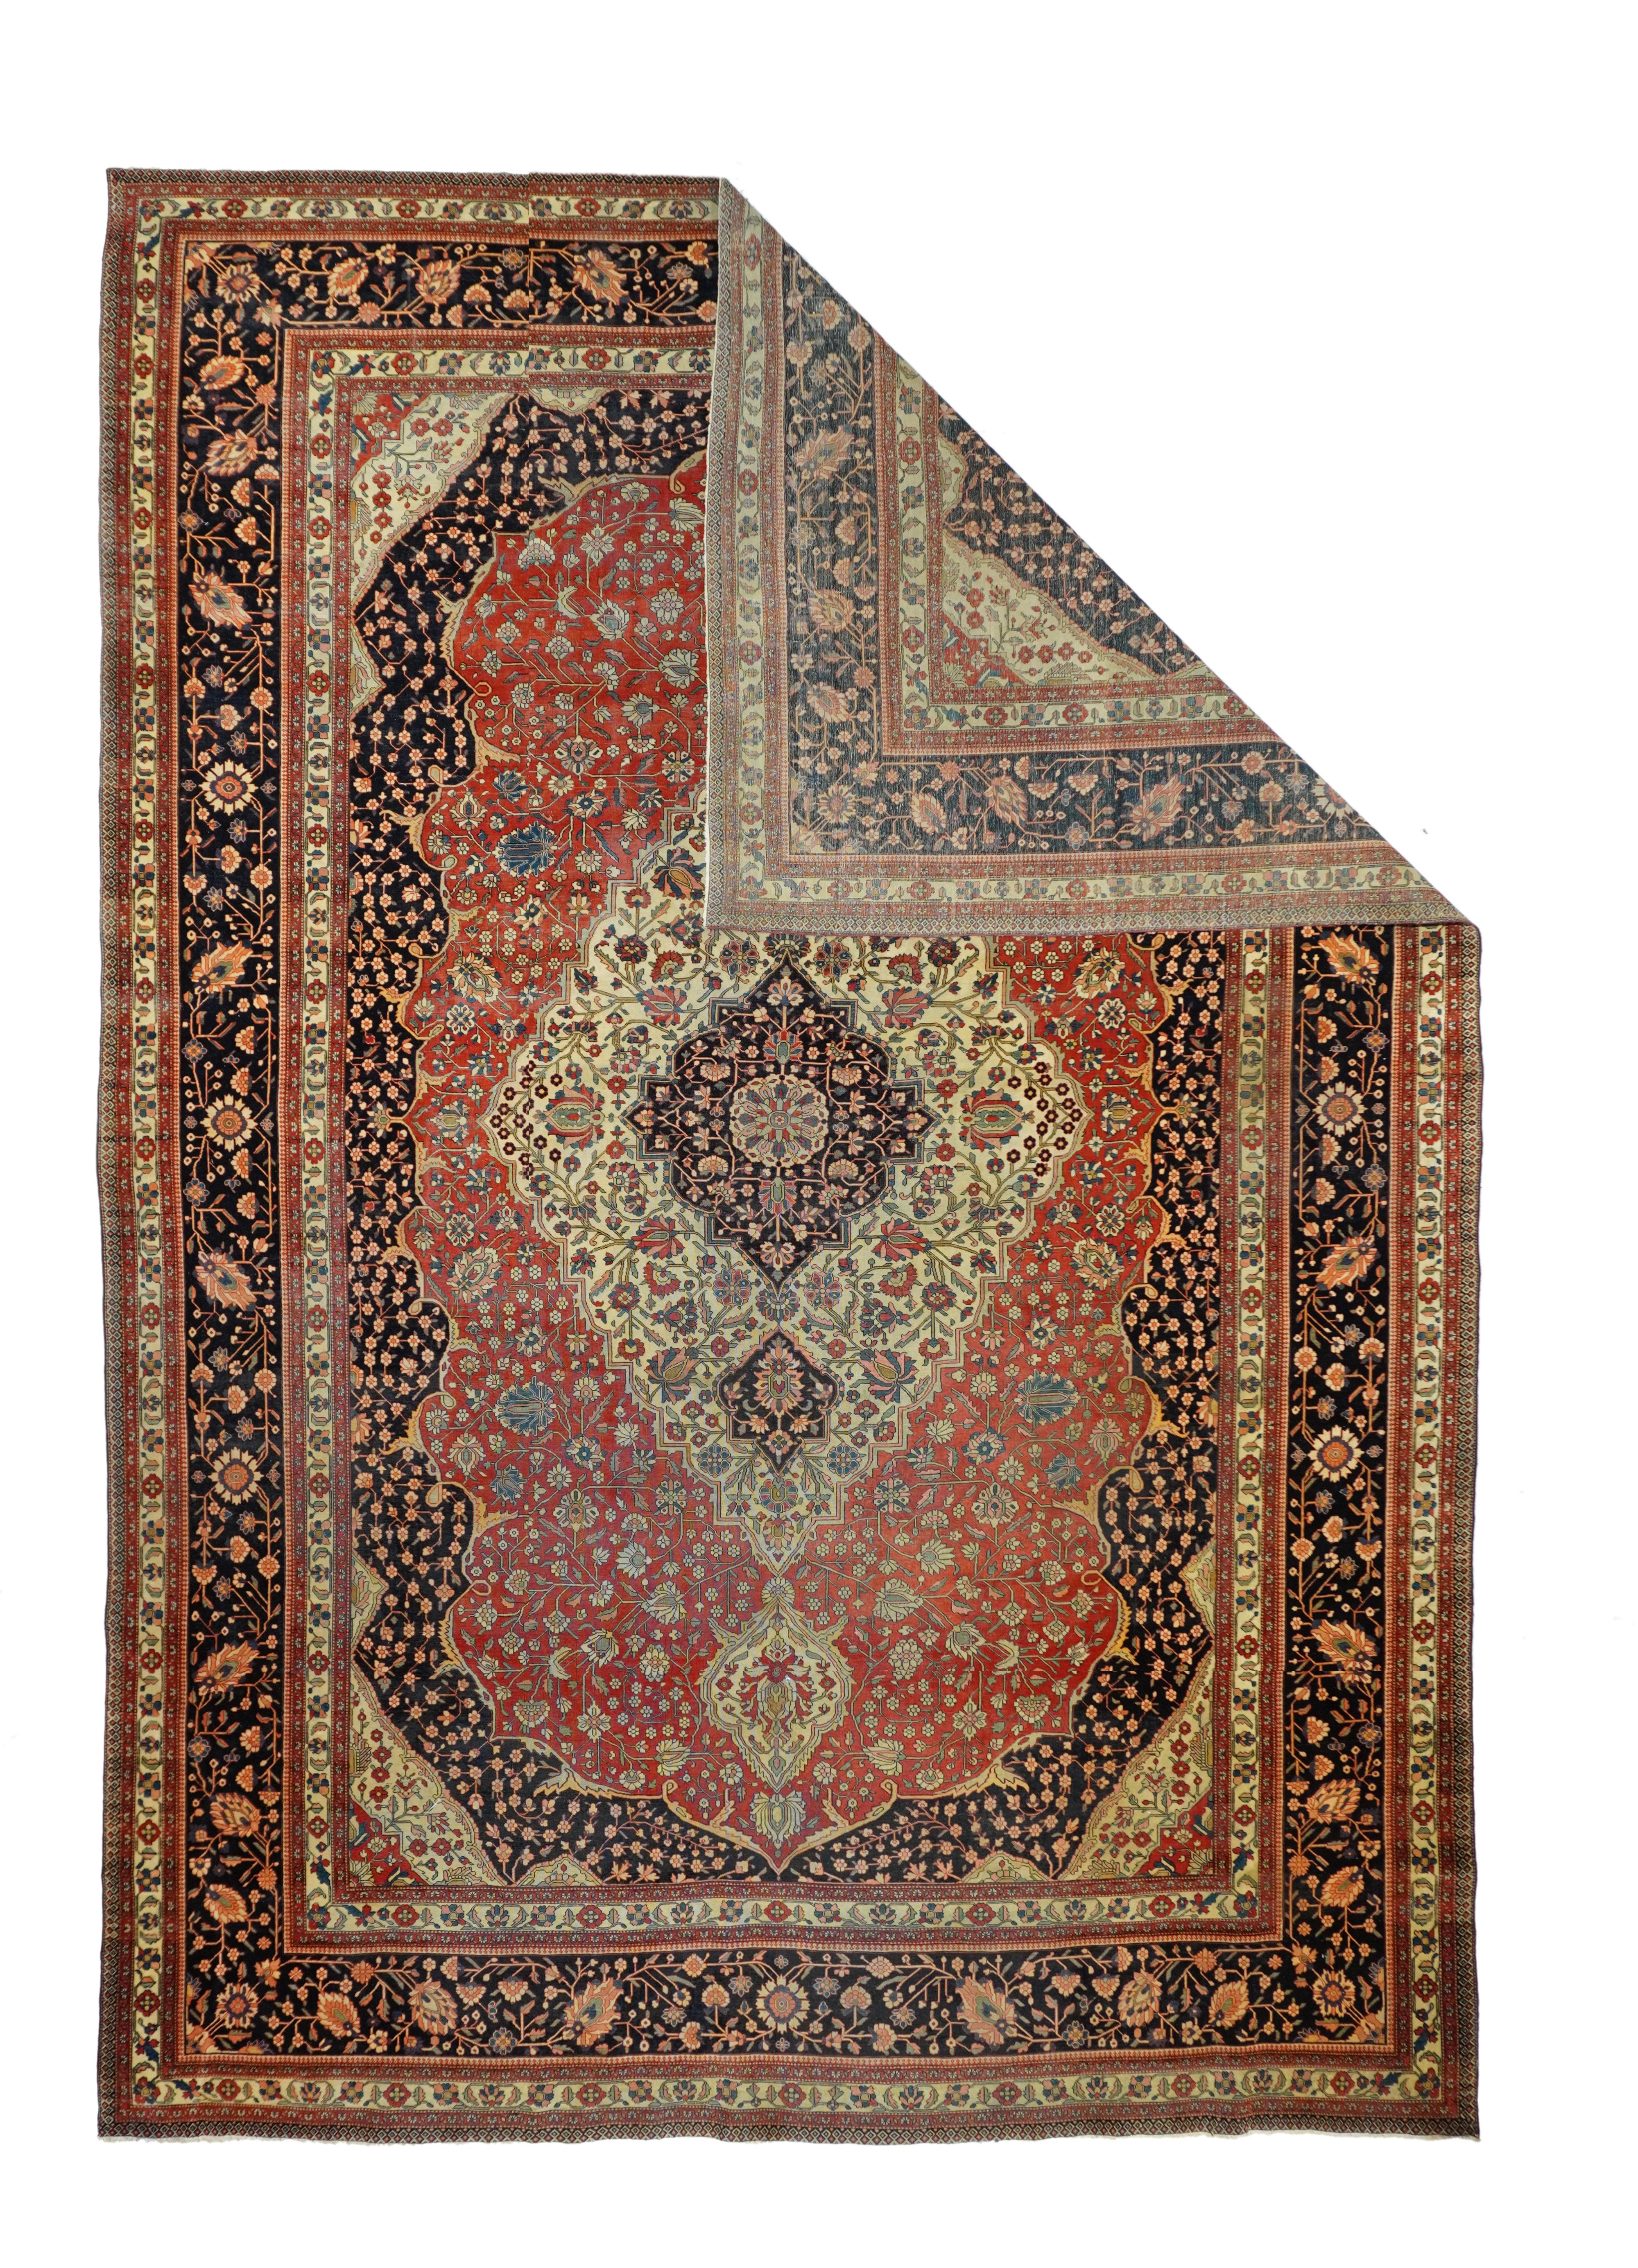 Antique Kashan rug, measures: 9' x 12'6''. From the later antique Mohtasham era, this finely woven central Persian carpet with velvety pile shows a navy millefleurs field enclosing a shaped red cartouche-form subfield edged with straw forked